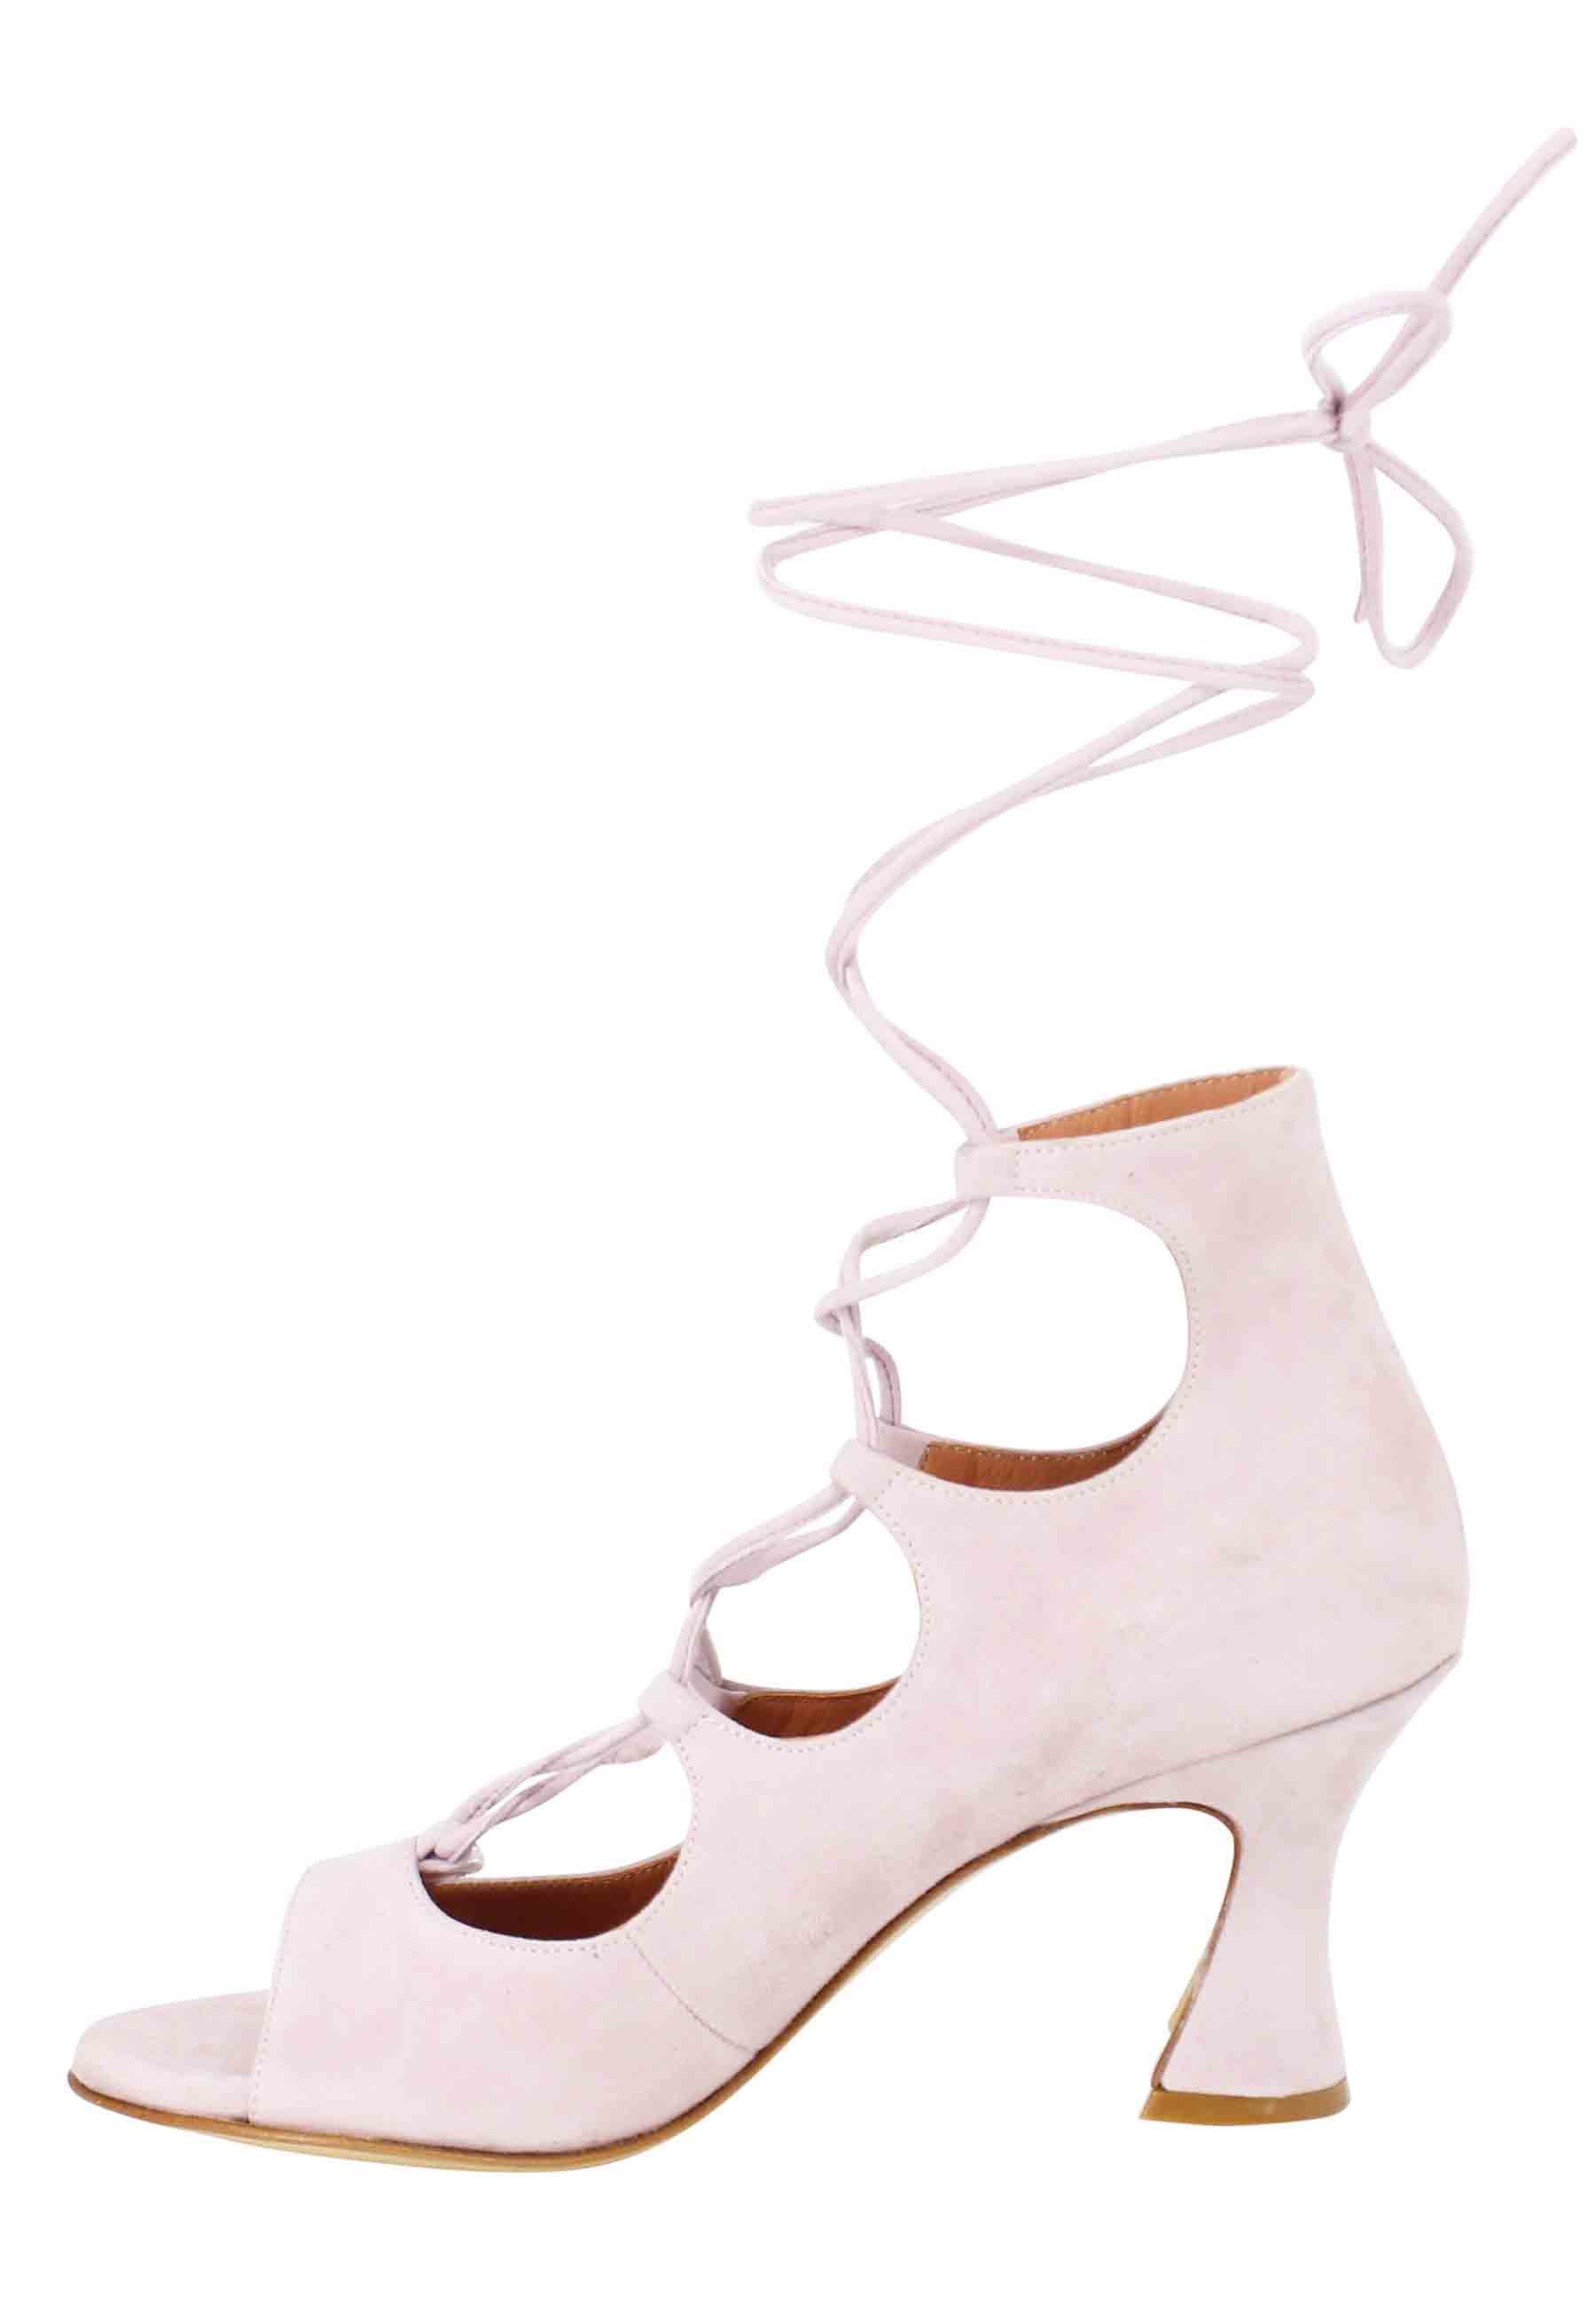 Women's lilac suede sandals with ankle laces and closed heel